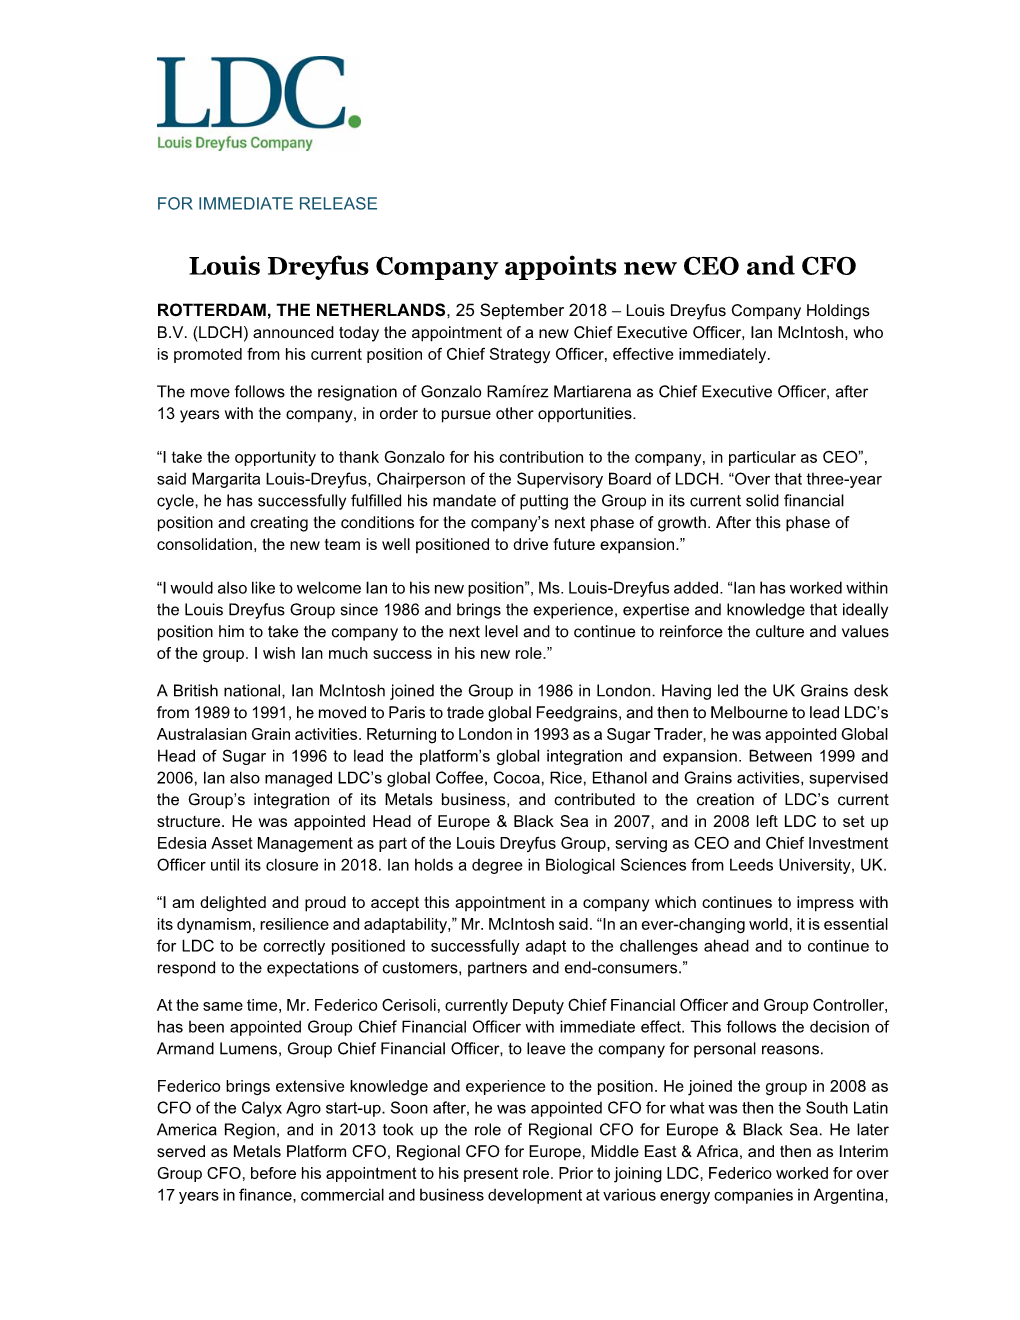 Louis Dreyfus Company Appoints New CEO and CFO